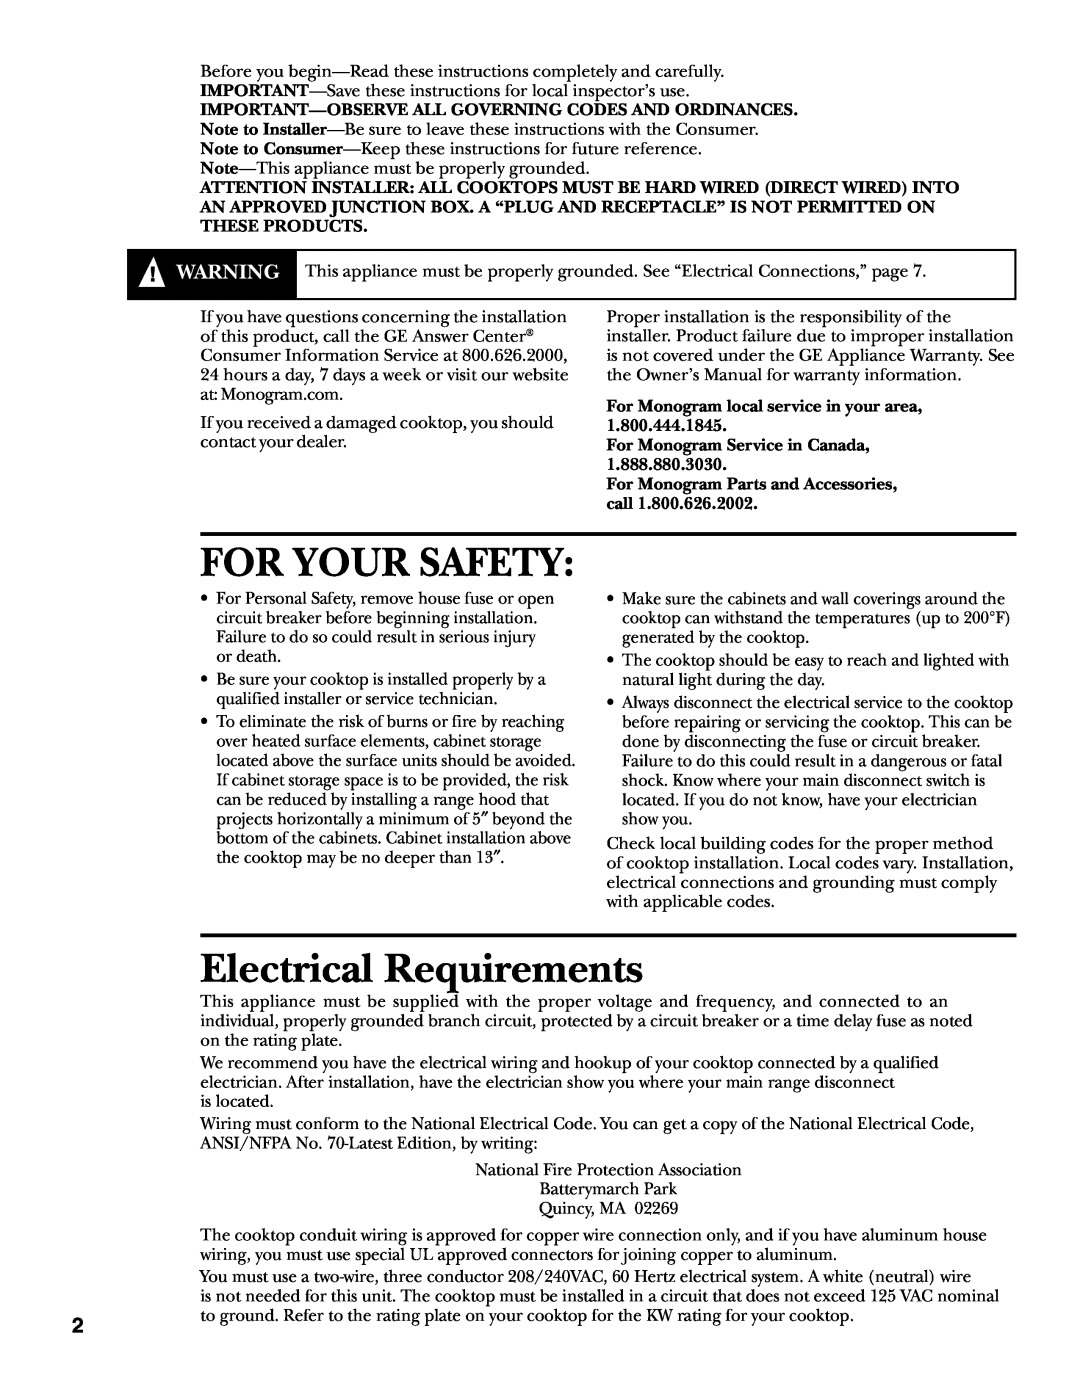 GE Monogram ZEU30R Electrical Requirements, For Monogram local service in your area, For Monogram Service in Canada 